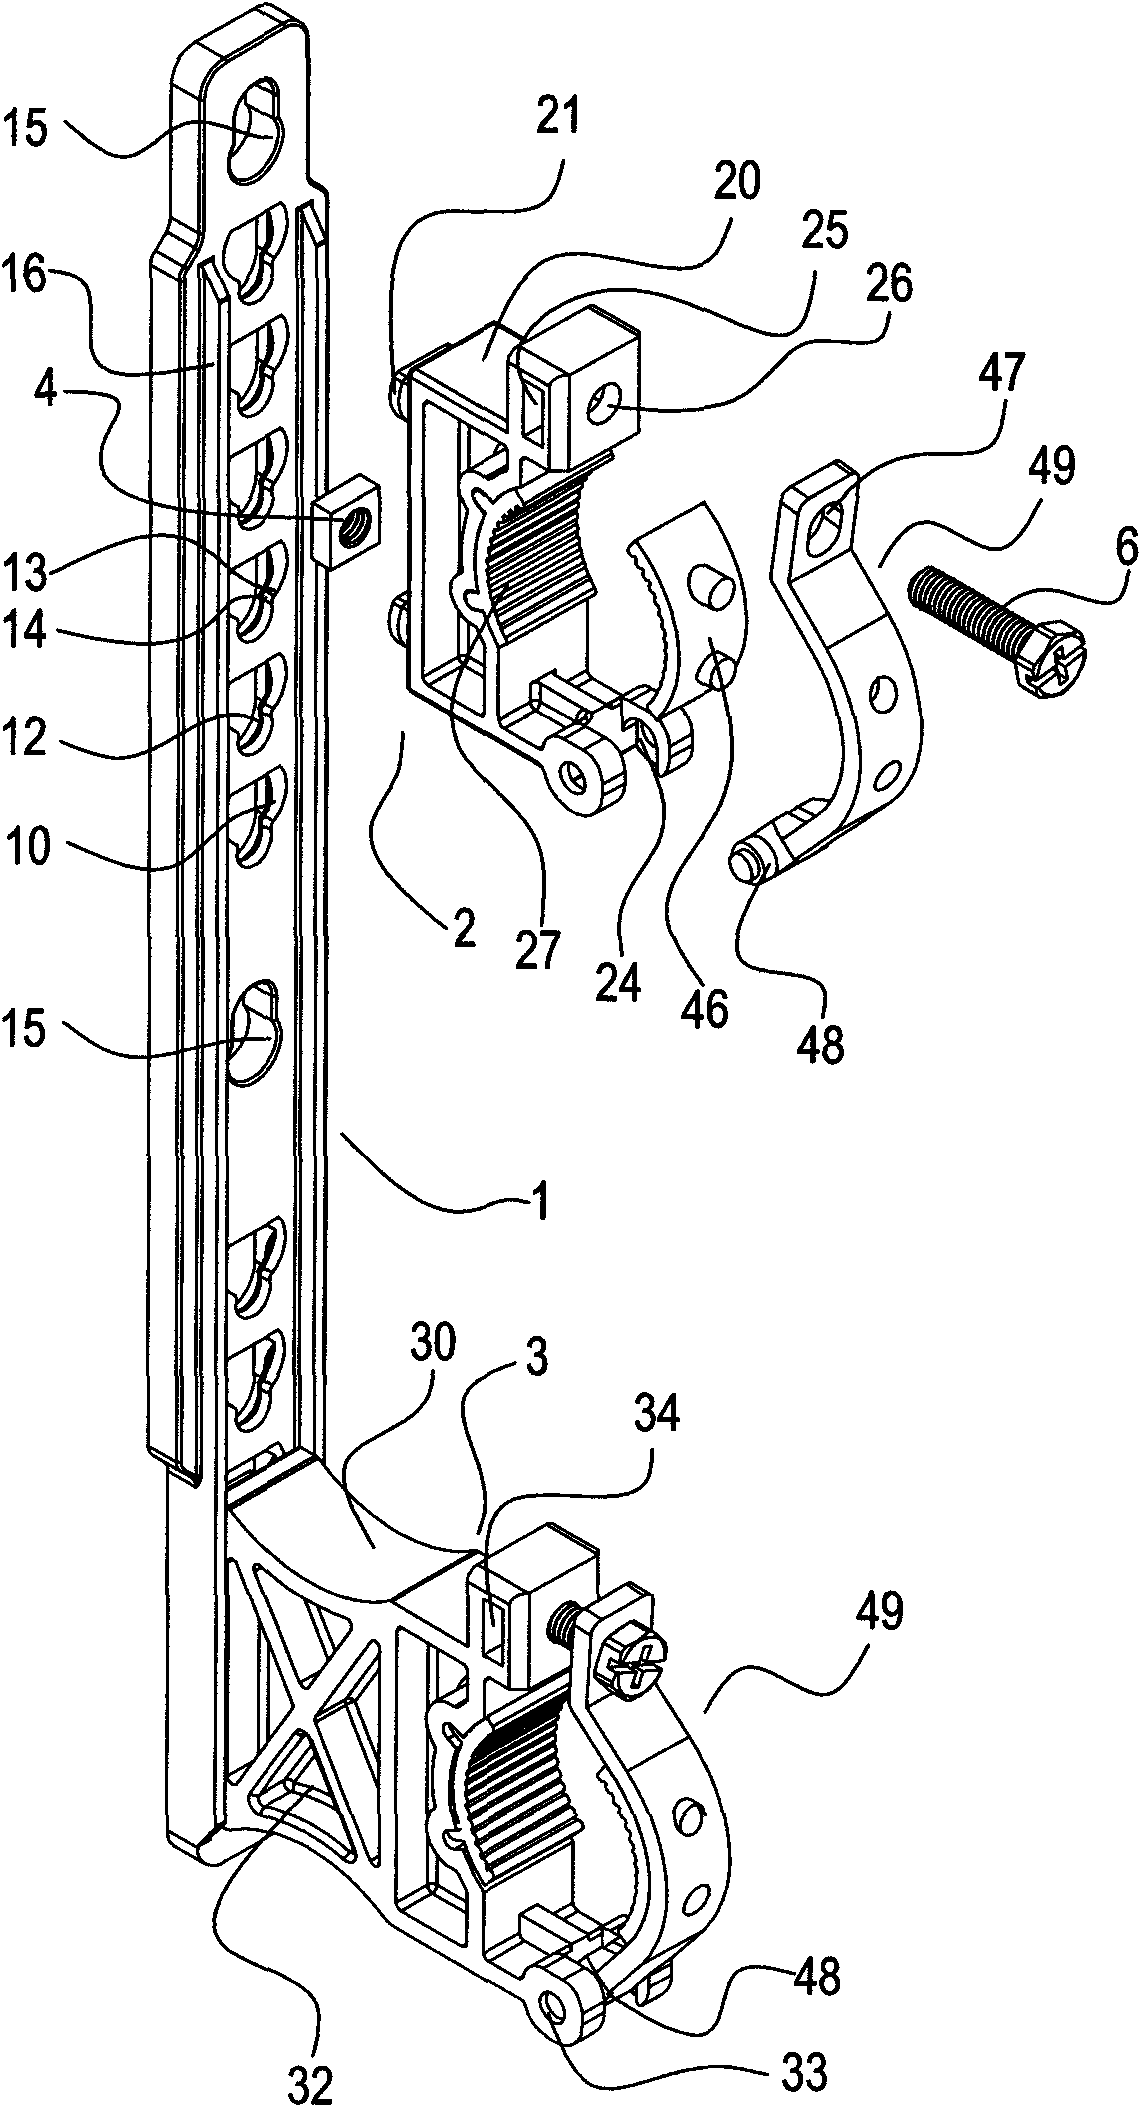 Plastic bracket of water dividing and collecting device